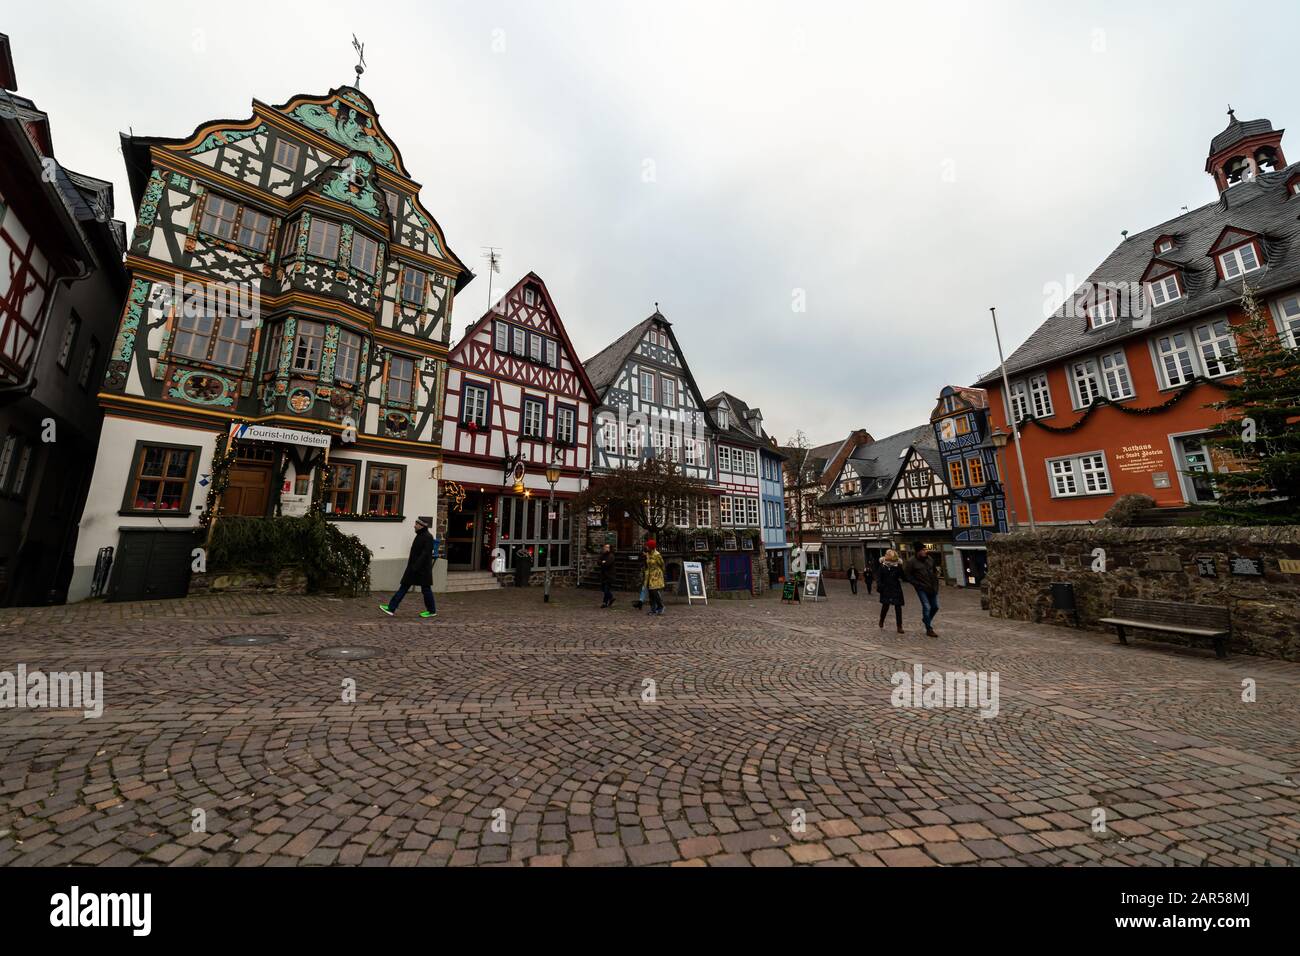 The ancient town of Idstein in germany Stock Photo